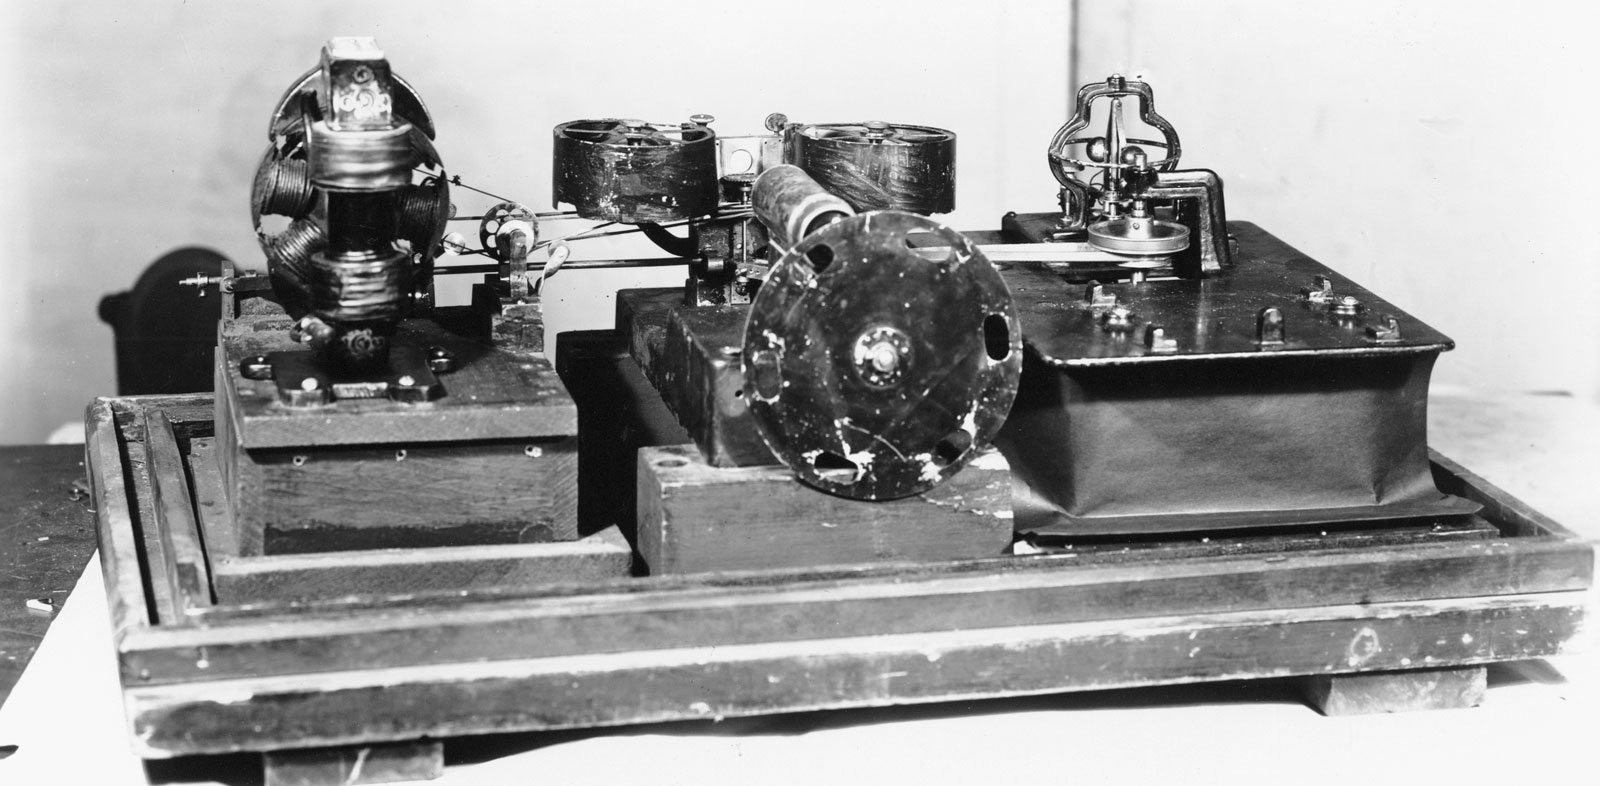 30.1_Kinetograph-motion-picture-camera-William-Kennedy-Laurie-Dickson-1888.jpg